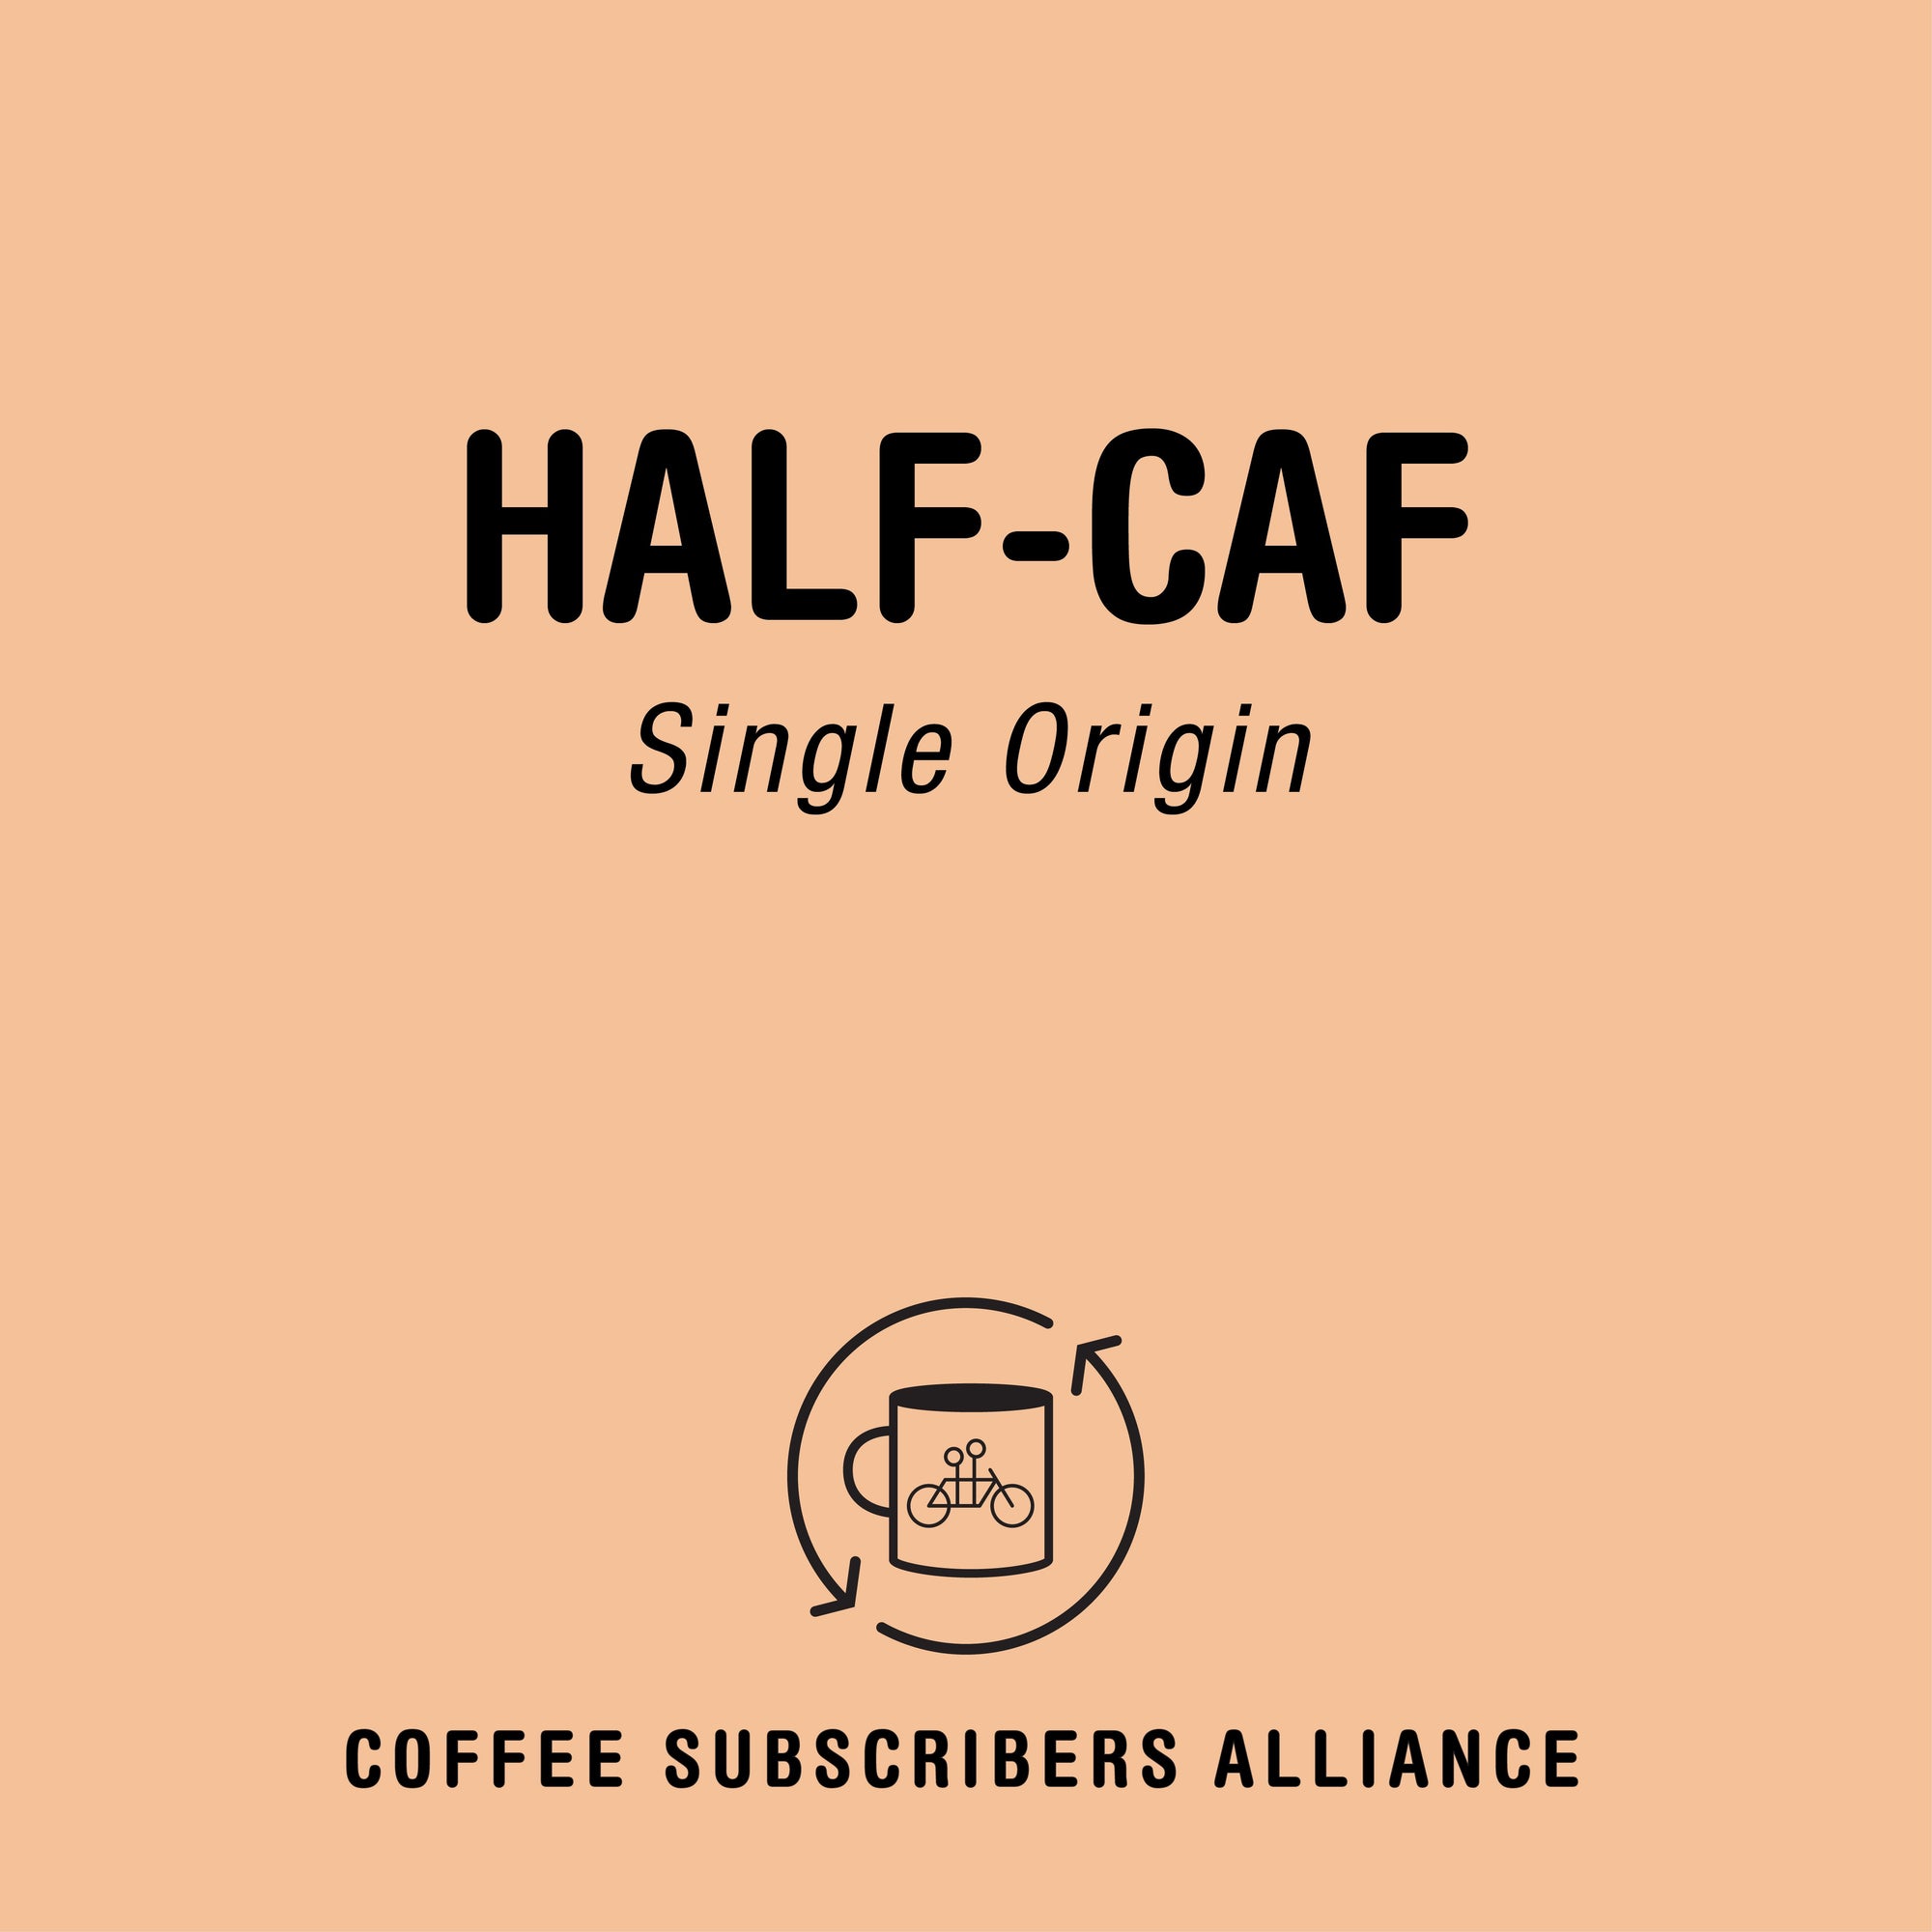 A minimalist graphic design featuring the text "Half-Caf Subscription Gift 4 Weeks x 12" at the top and a logo with a coffee cup surrounded by a circular frame labeled "Tandem Coffee Subscription Alliance" on a solid color background.